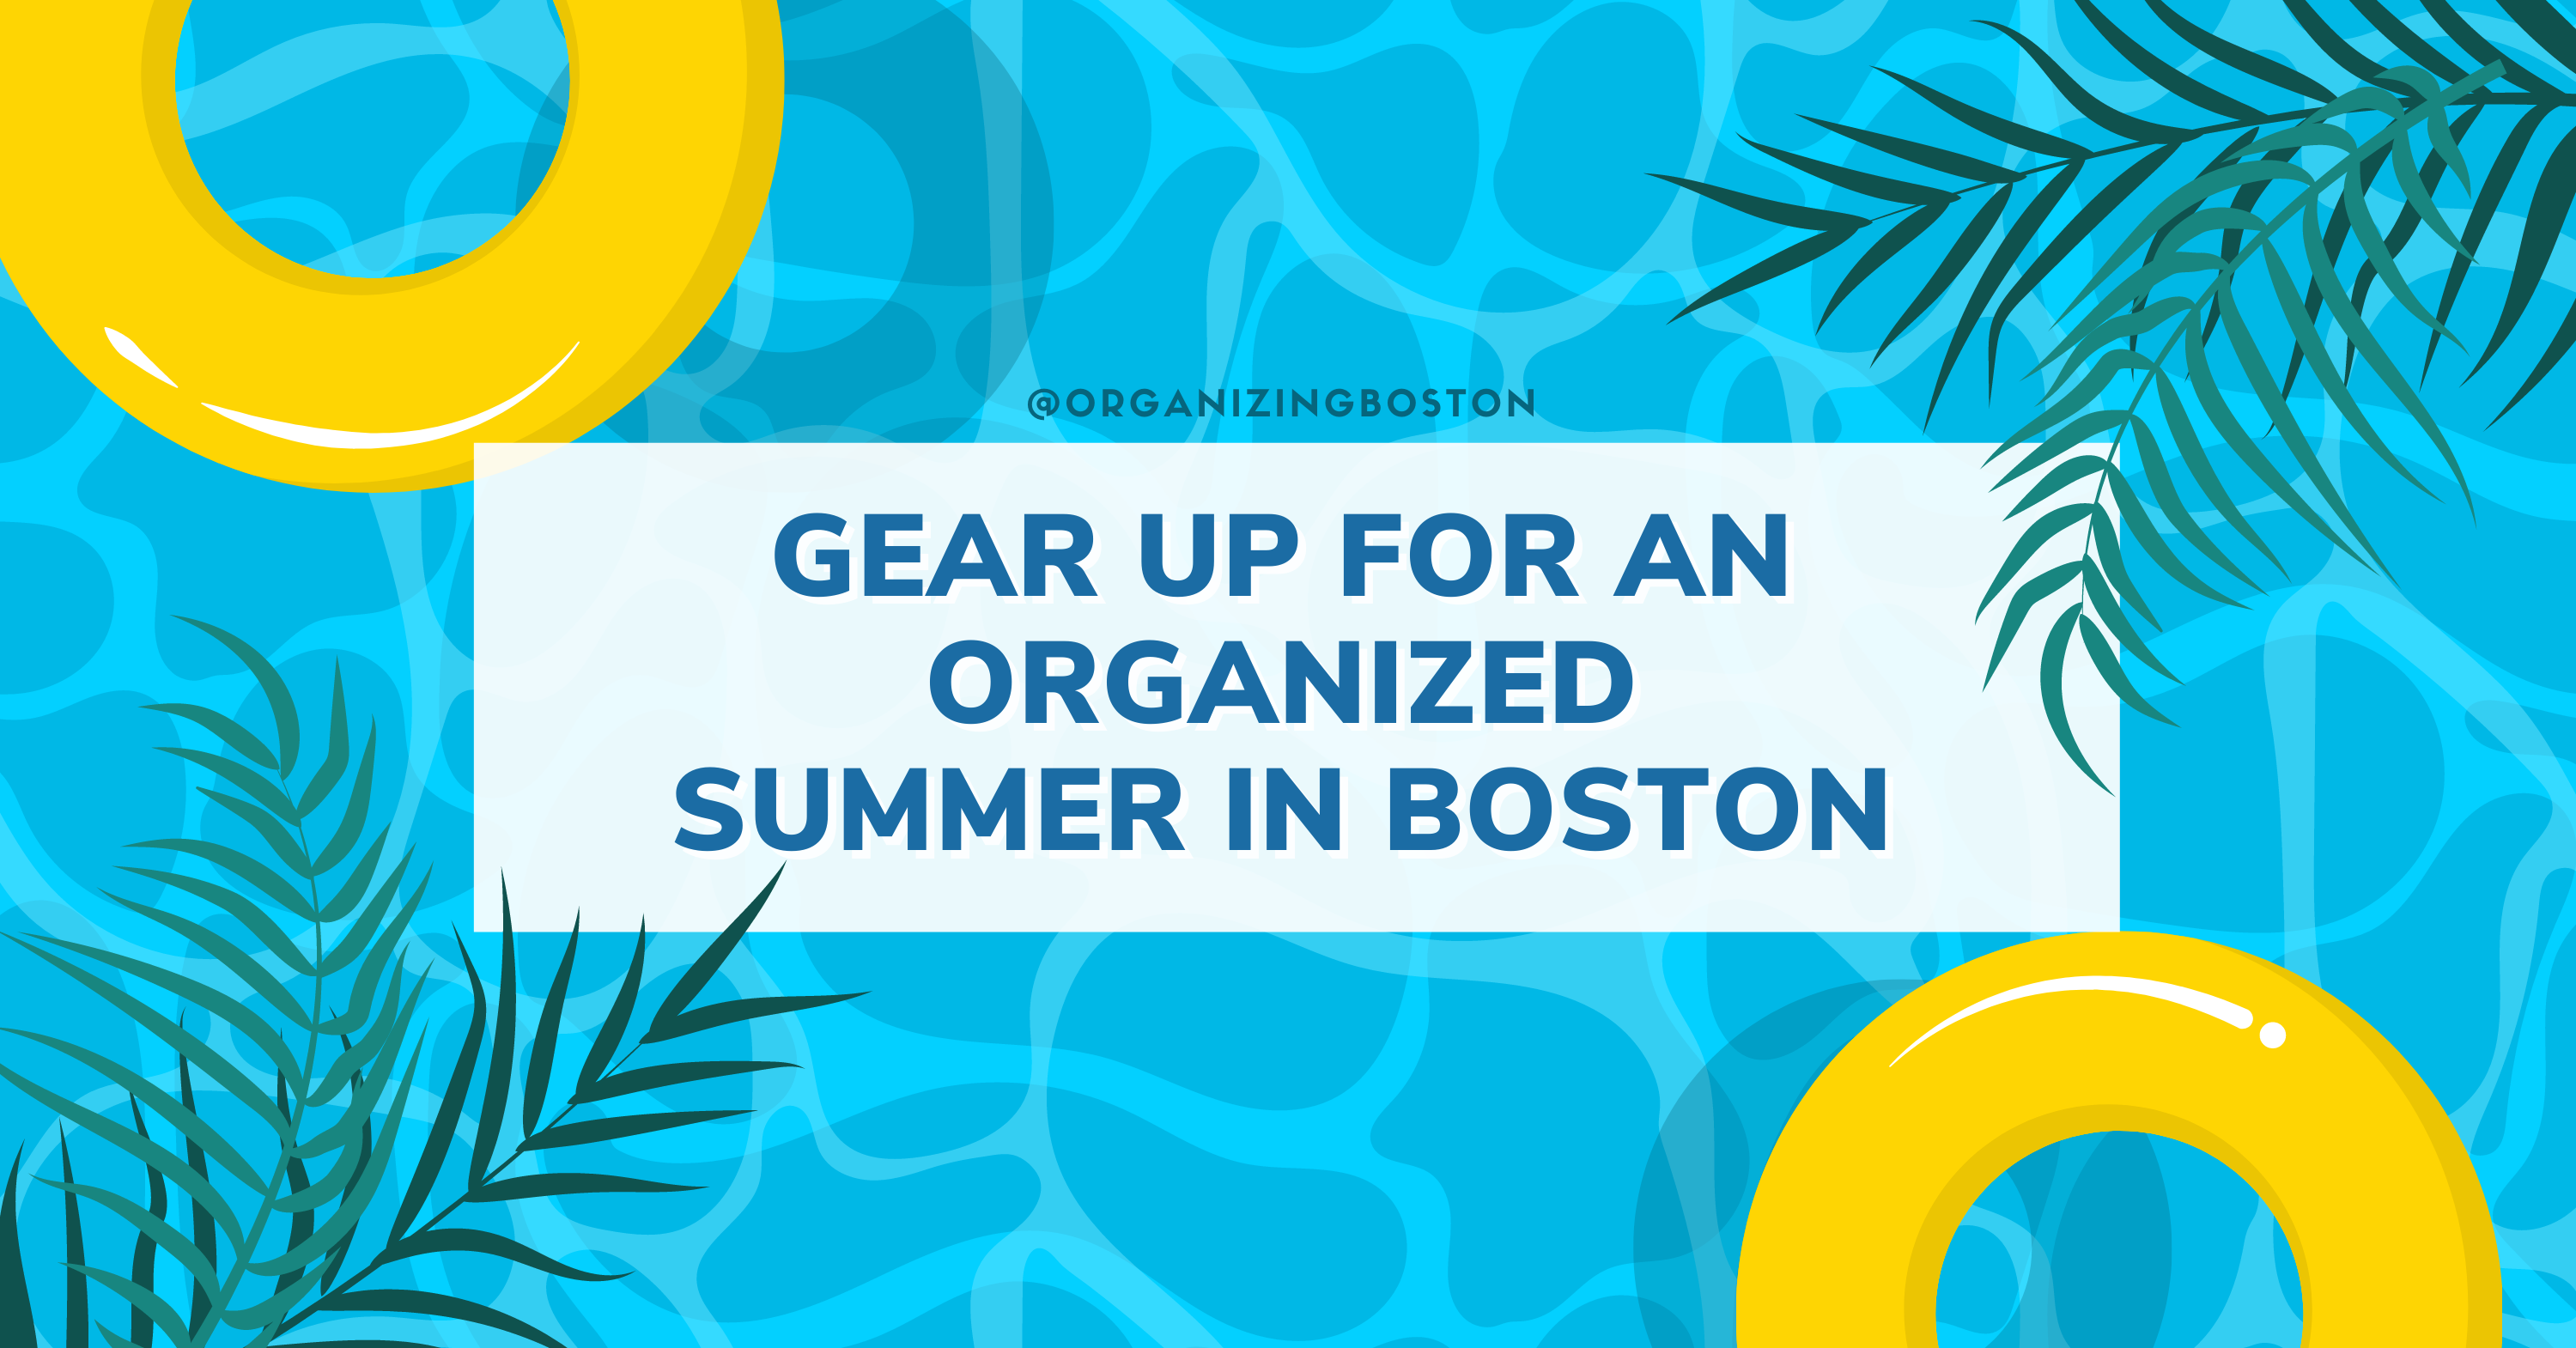 Gear Up for an Organized Summer in Boston